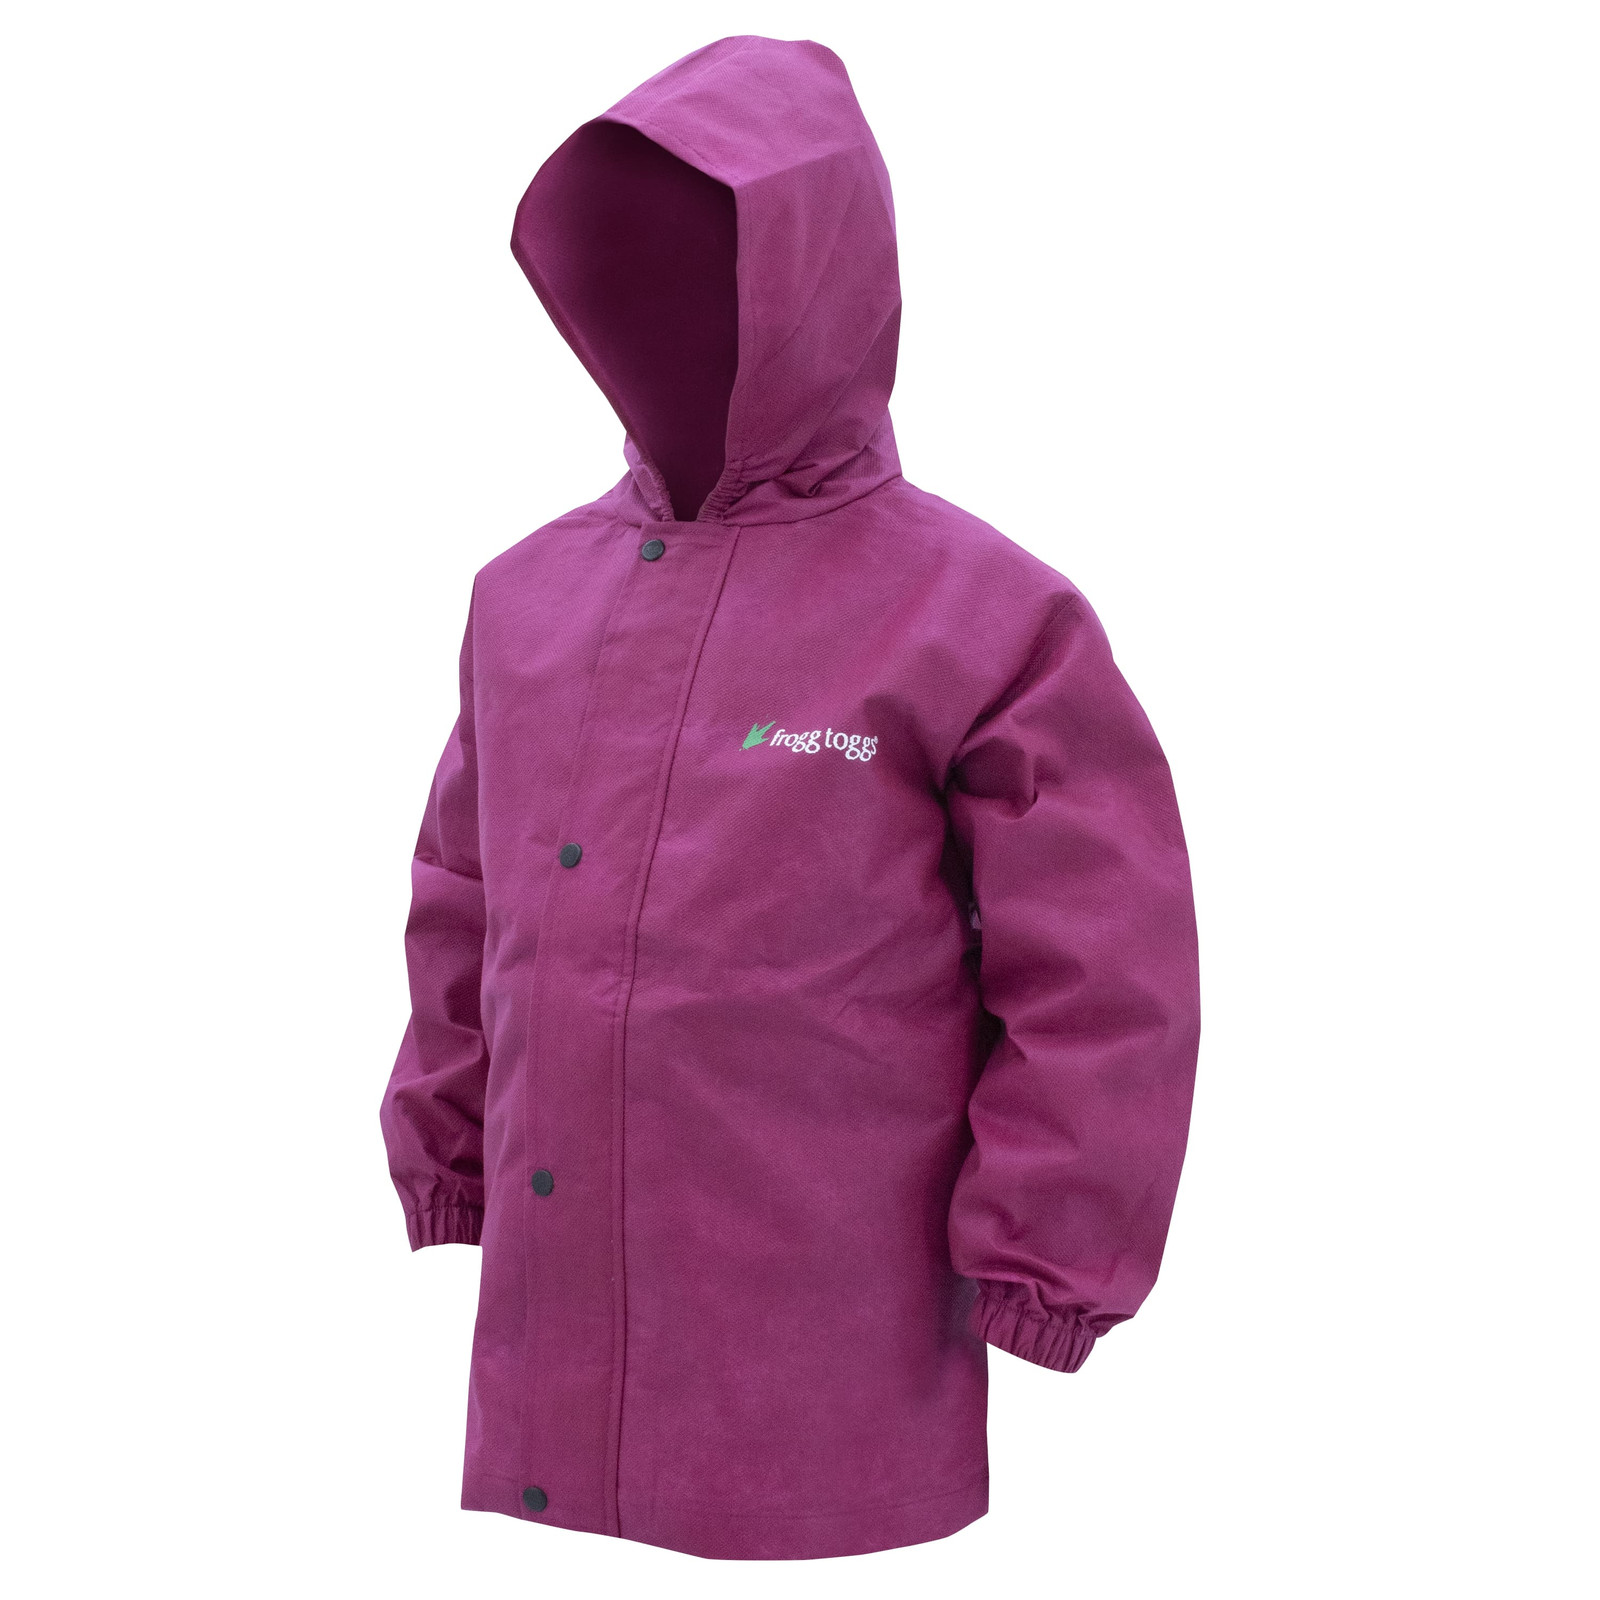 Polly Woggs Youth Rain Jacket